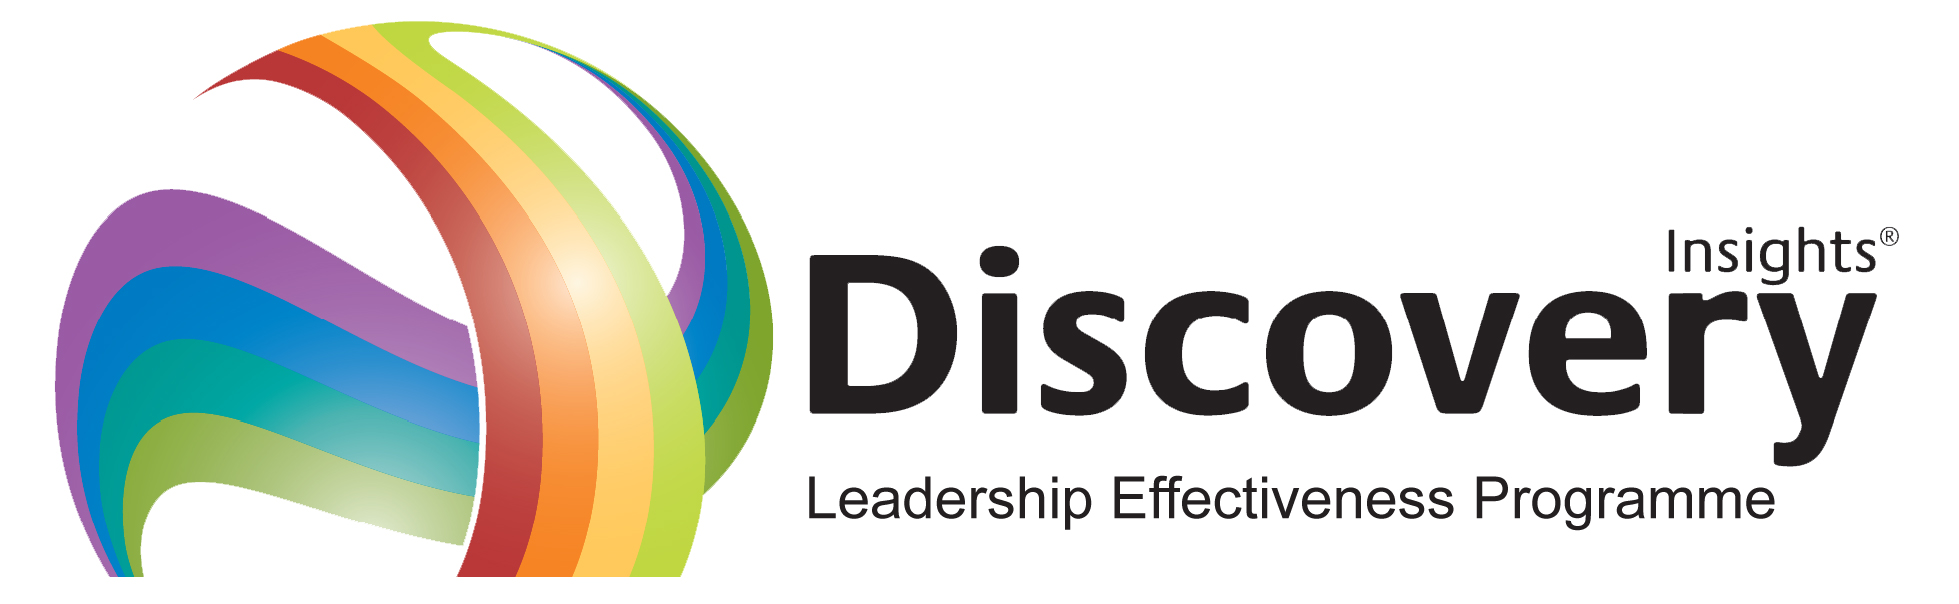 Discovery Insights Leadership Effectiveness Programme